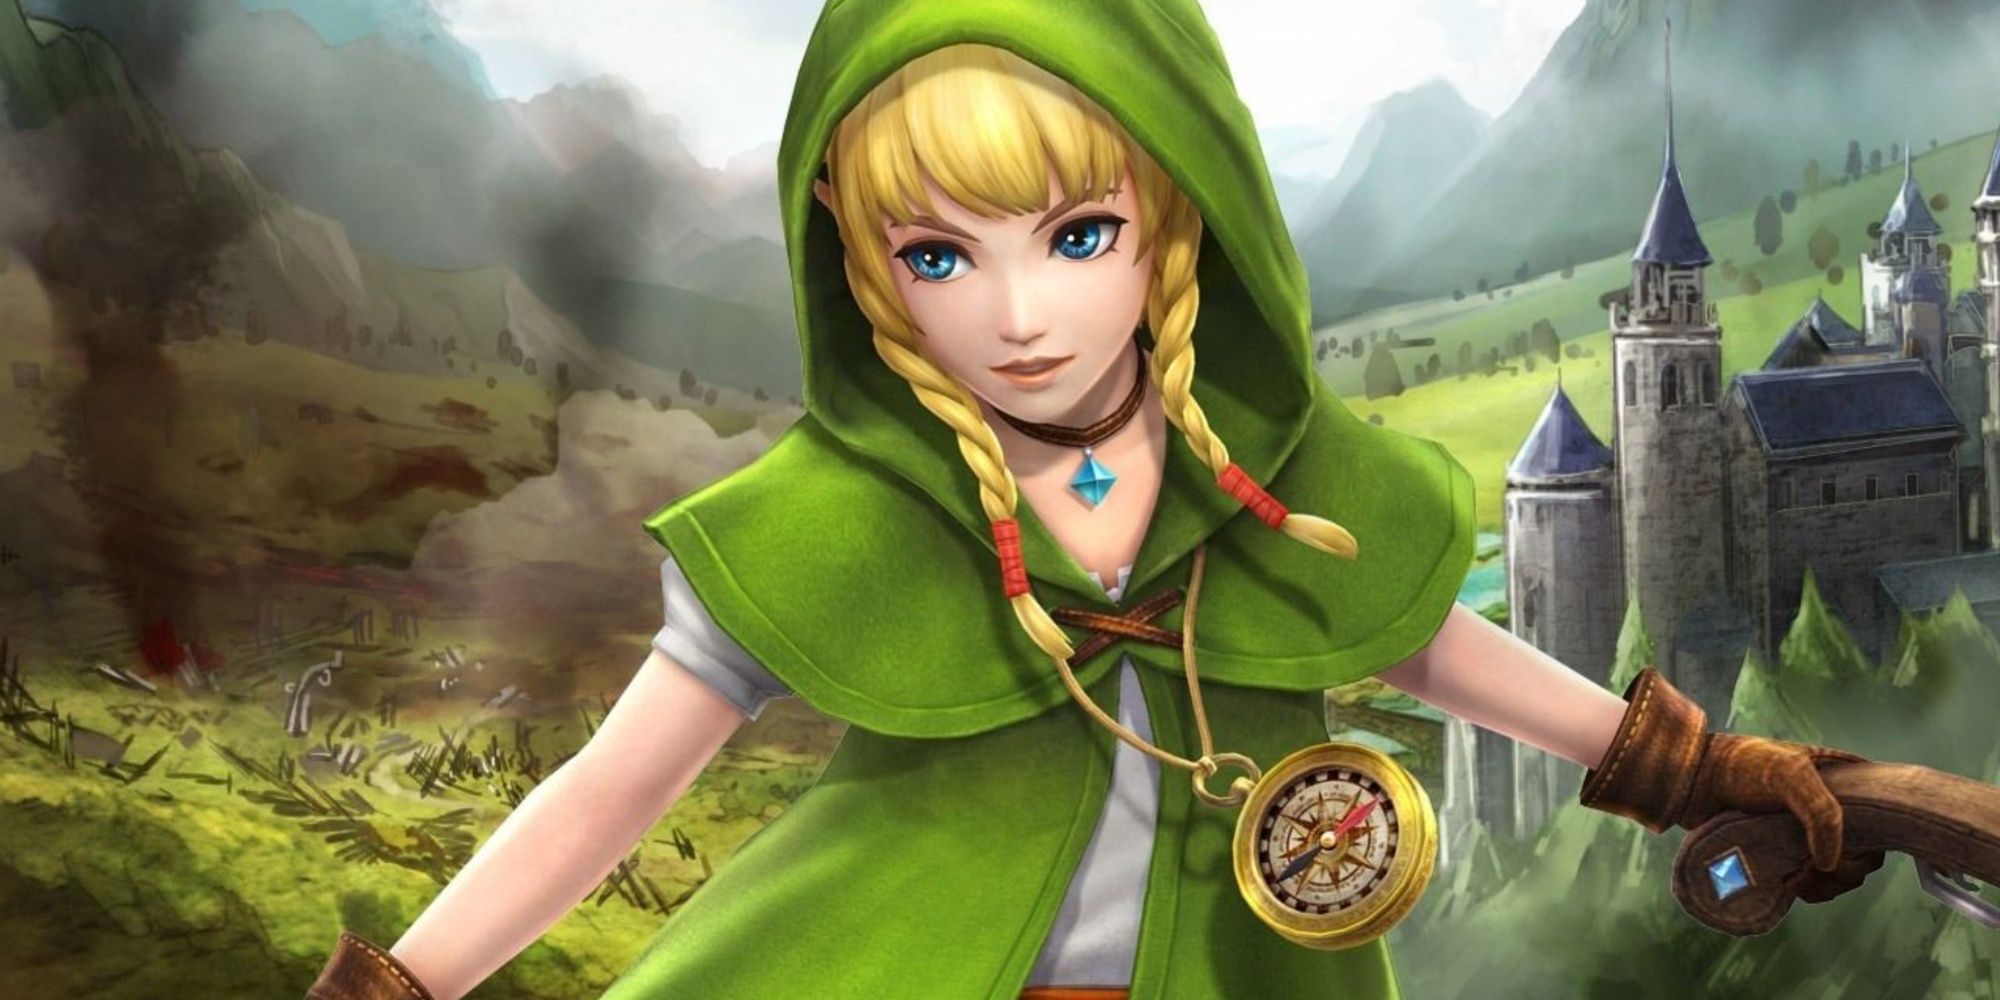 Linkle against the background of Hyrule Castle in Hyrule Warriors